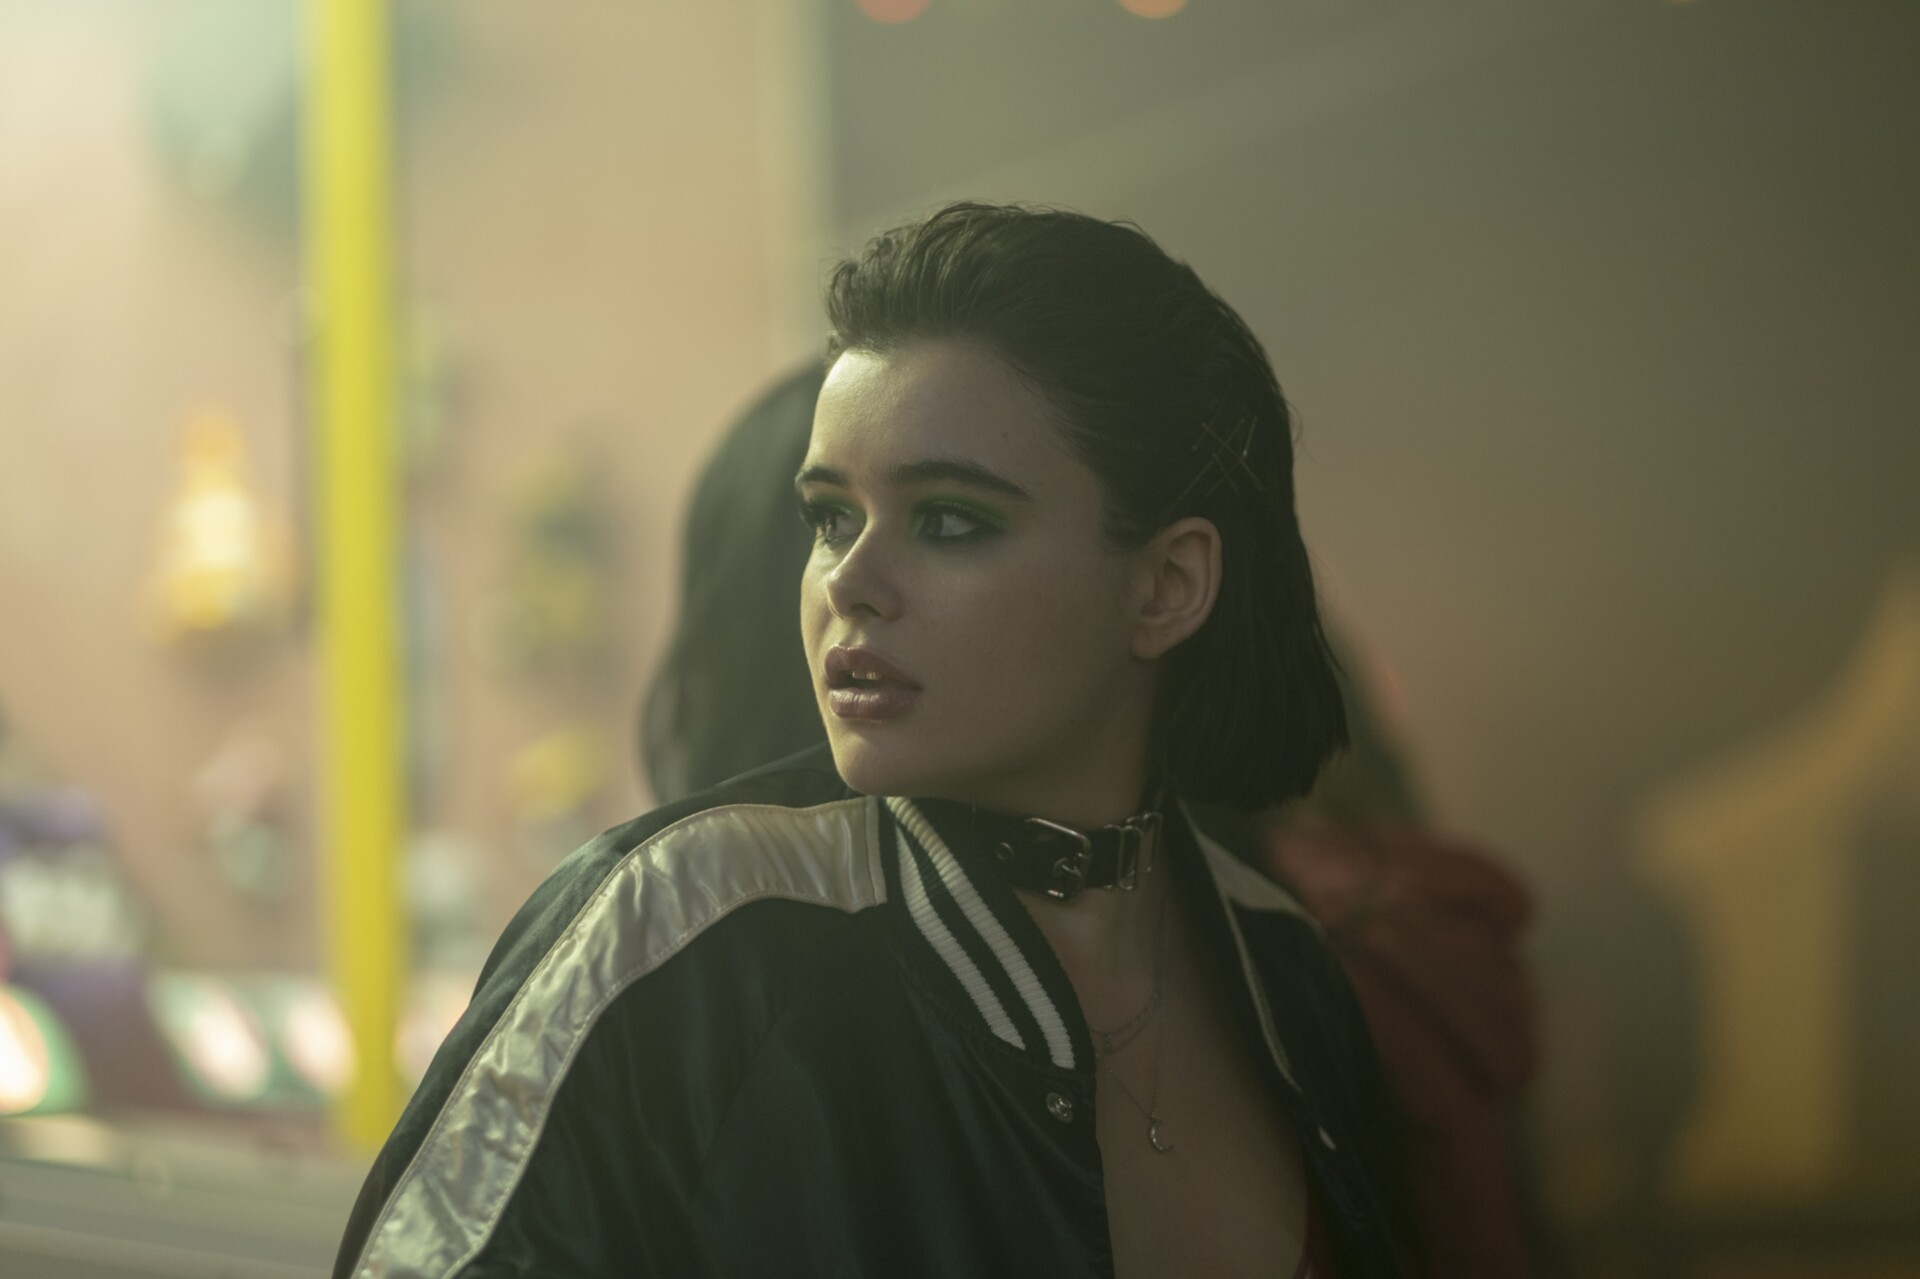 Euphoria (TV Series): Barbie Ferreira, Best known for her role as Kat Hernandez in the HBO movie. 1920x1280 HD Wallpaper.